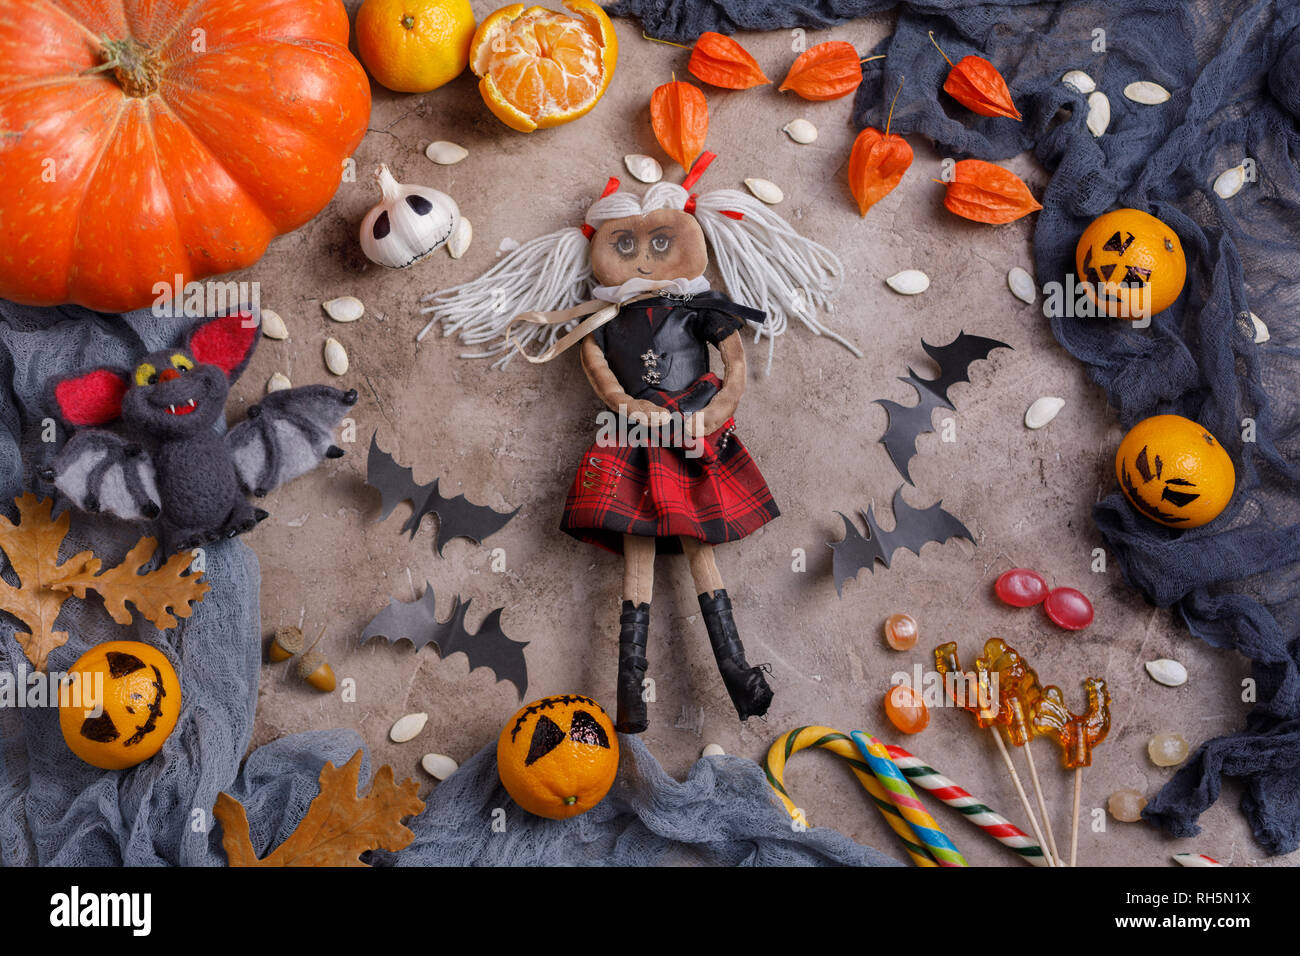 Table with sweets and toys, lollipops and decorated in honor of Halloween. Top view. Stock Photo